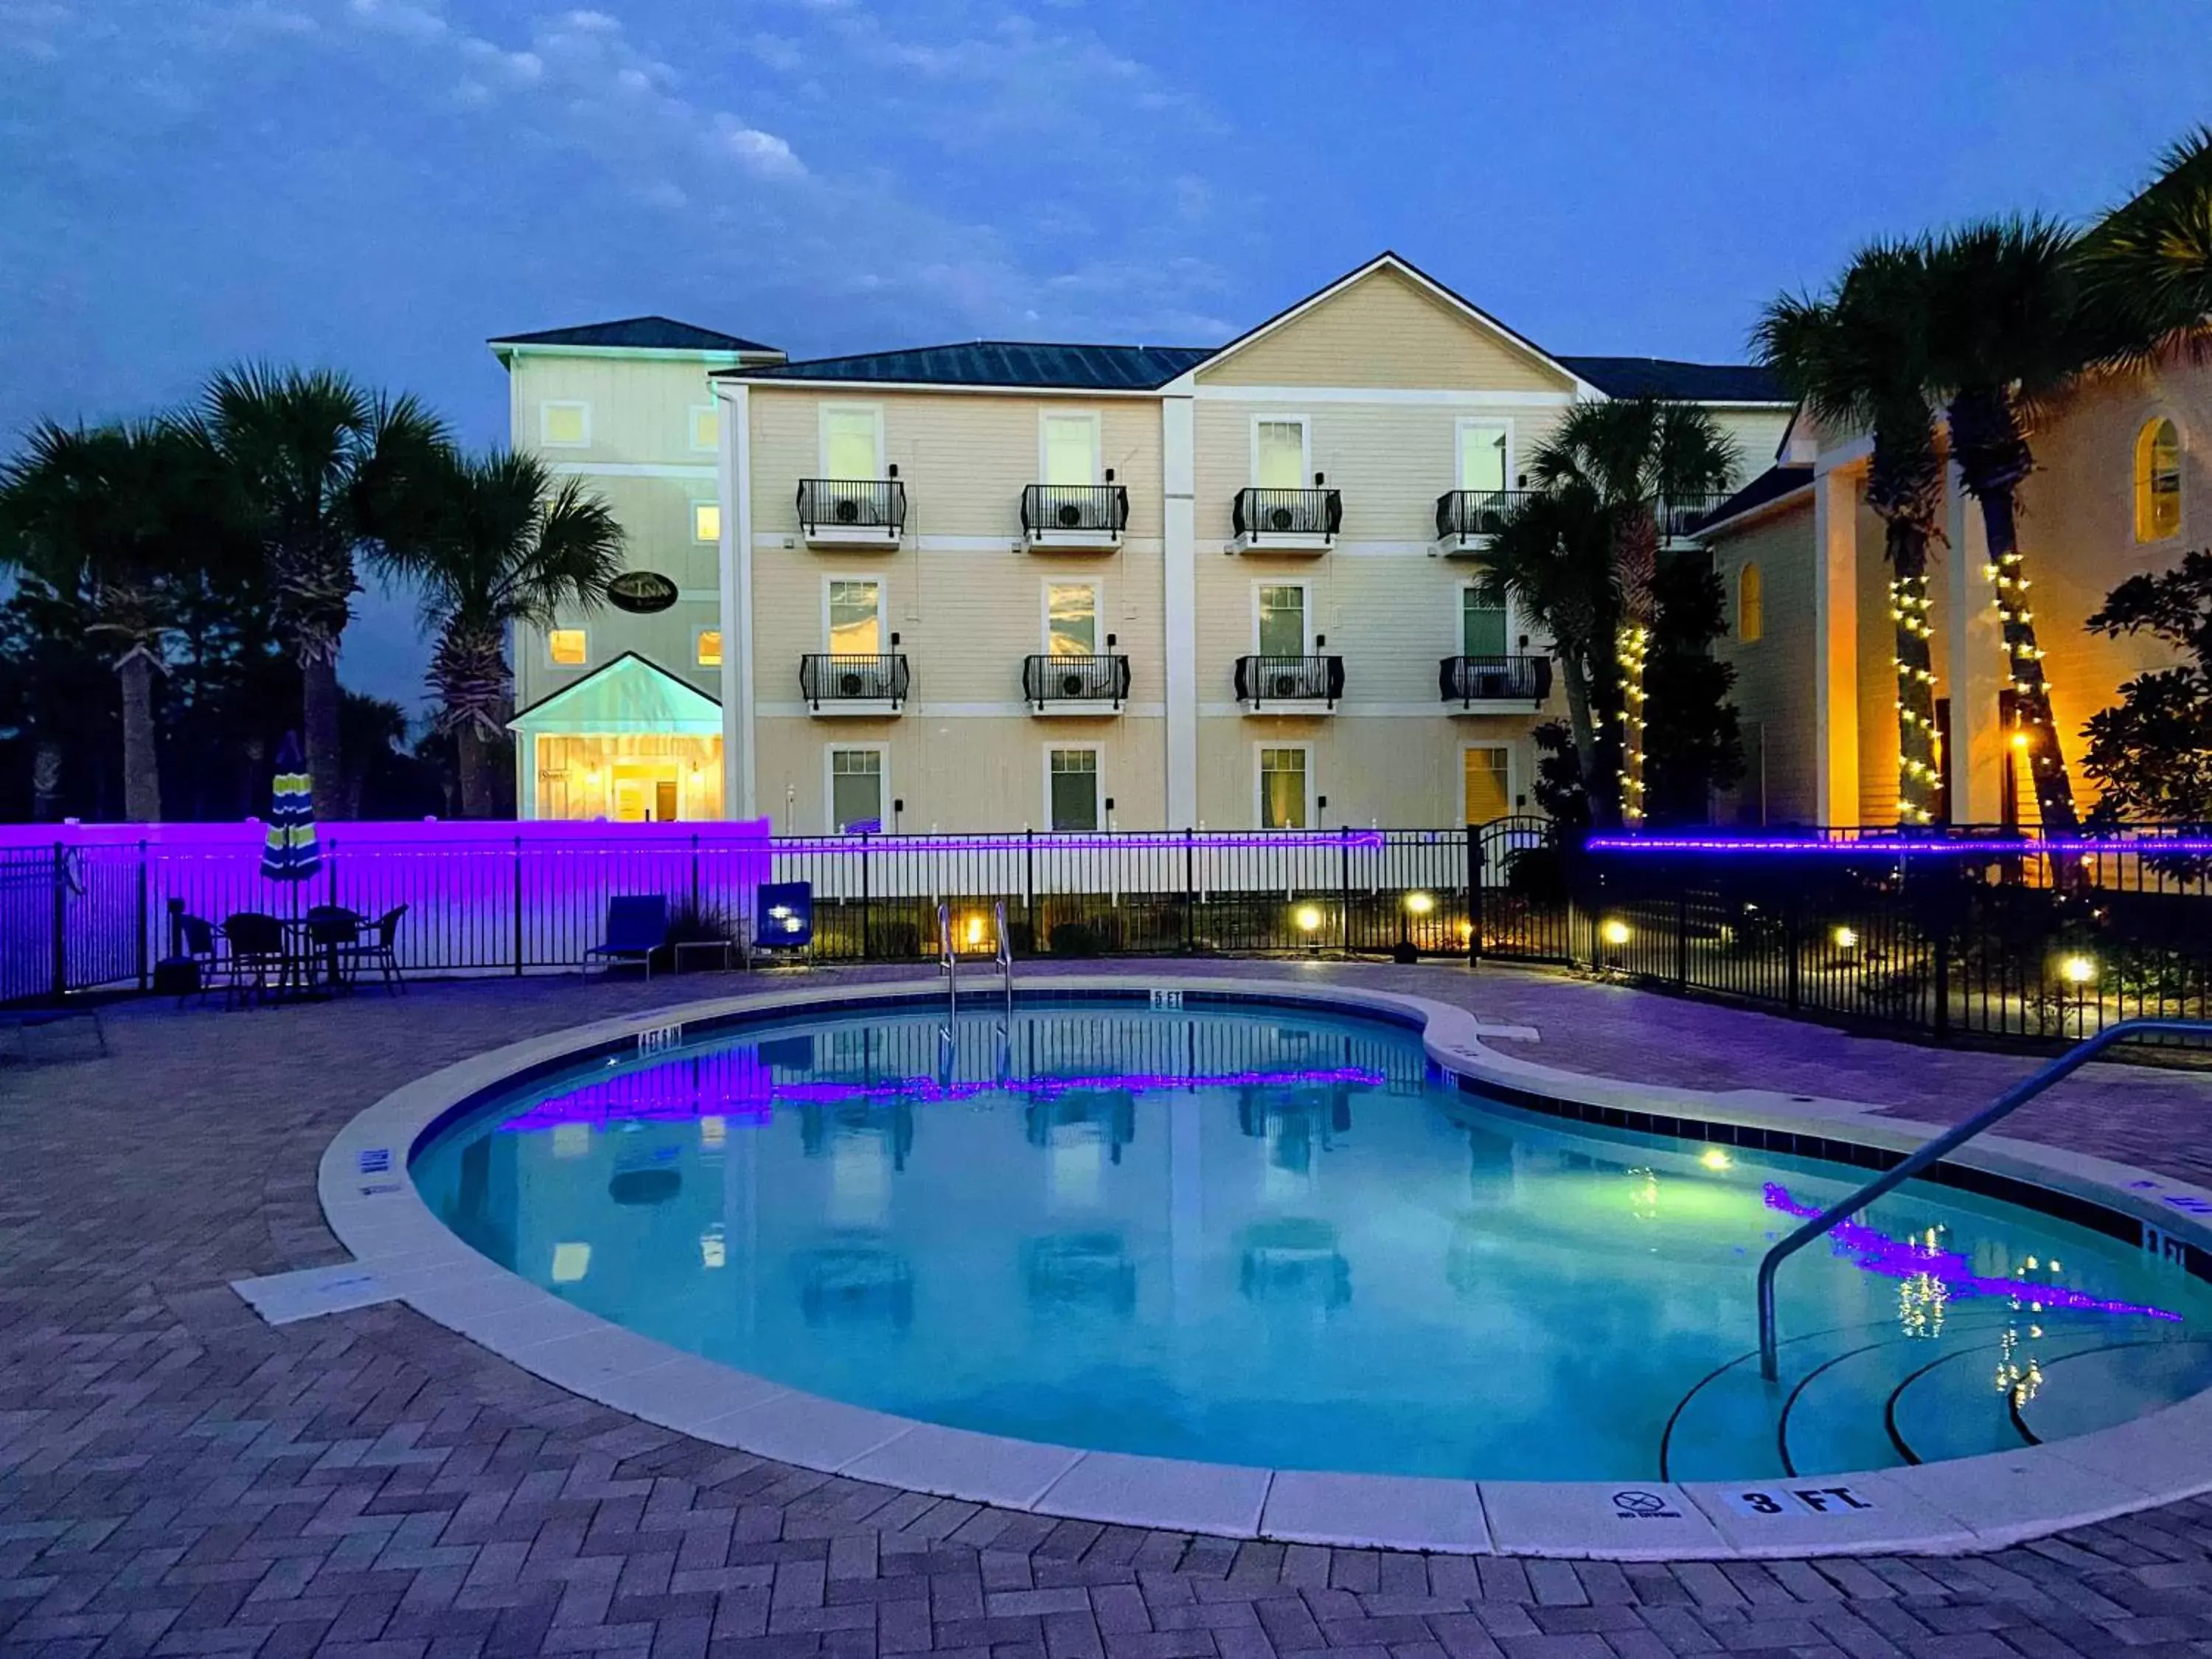 Swimming pool, Property Building in 30-A Inn & Suites